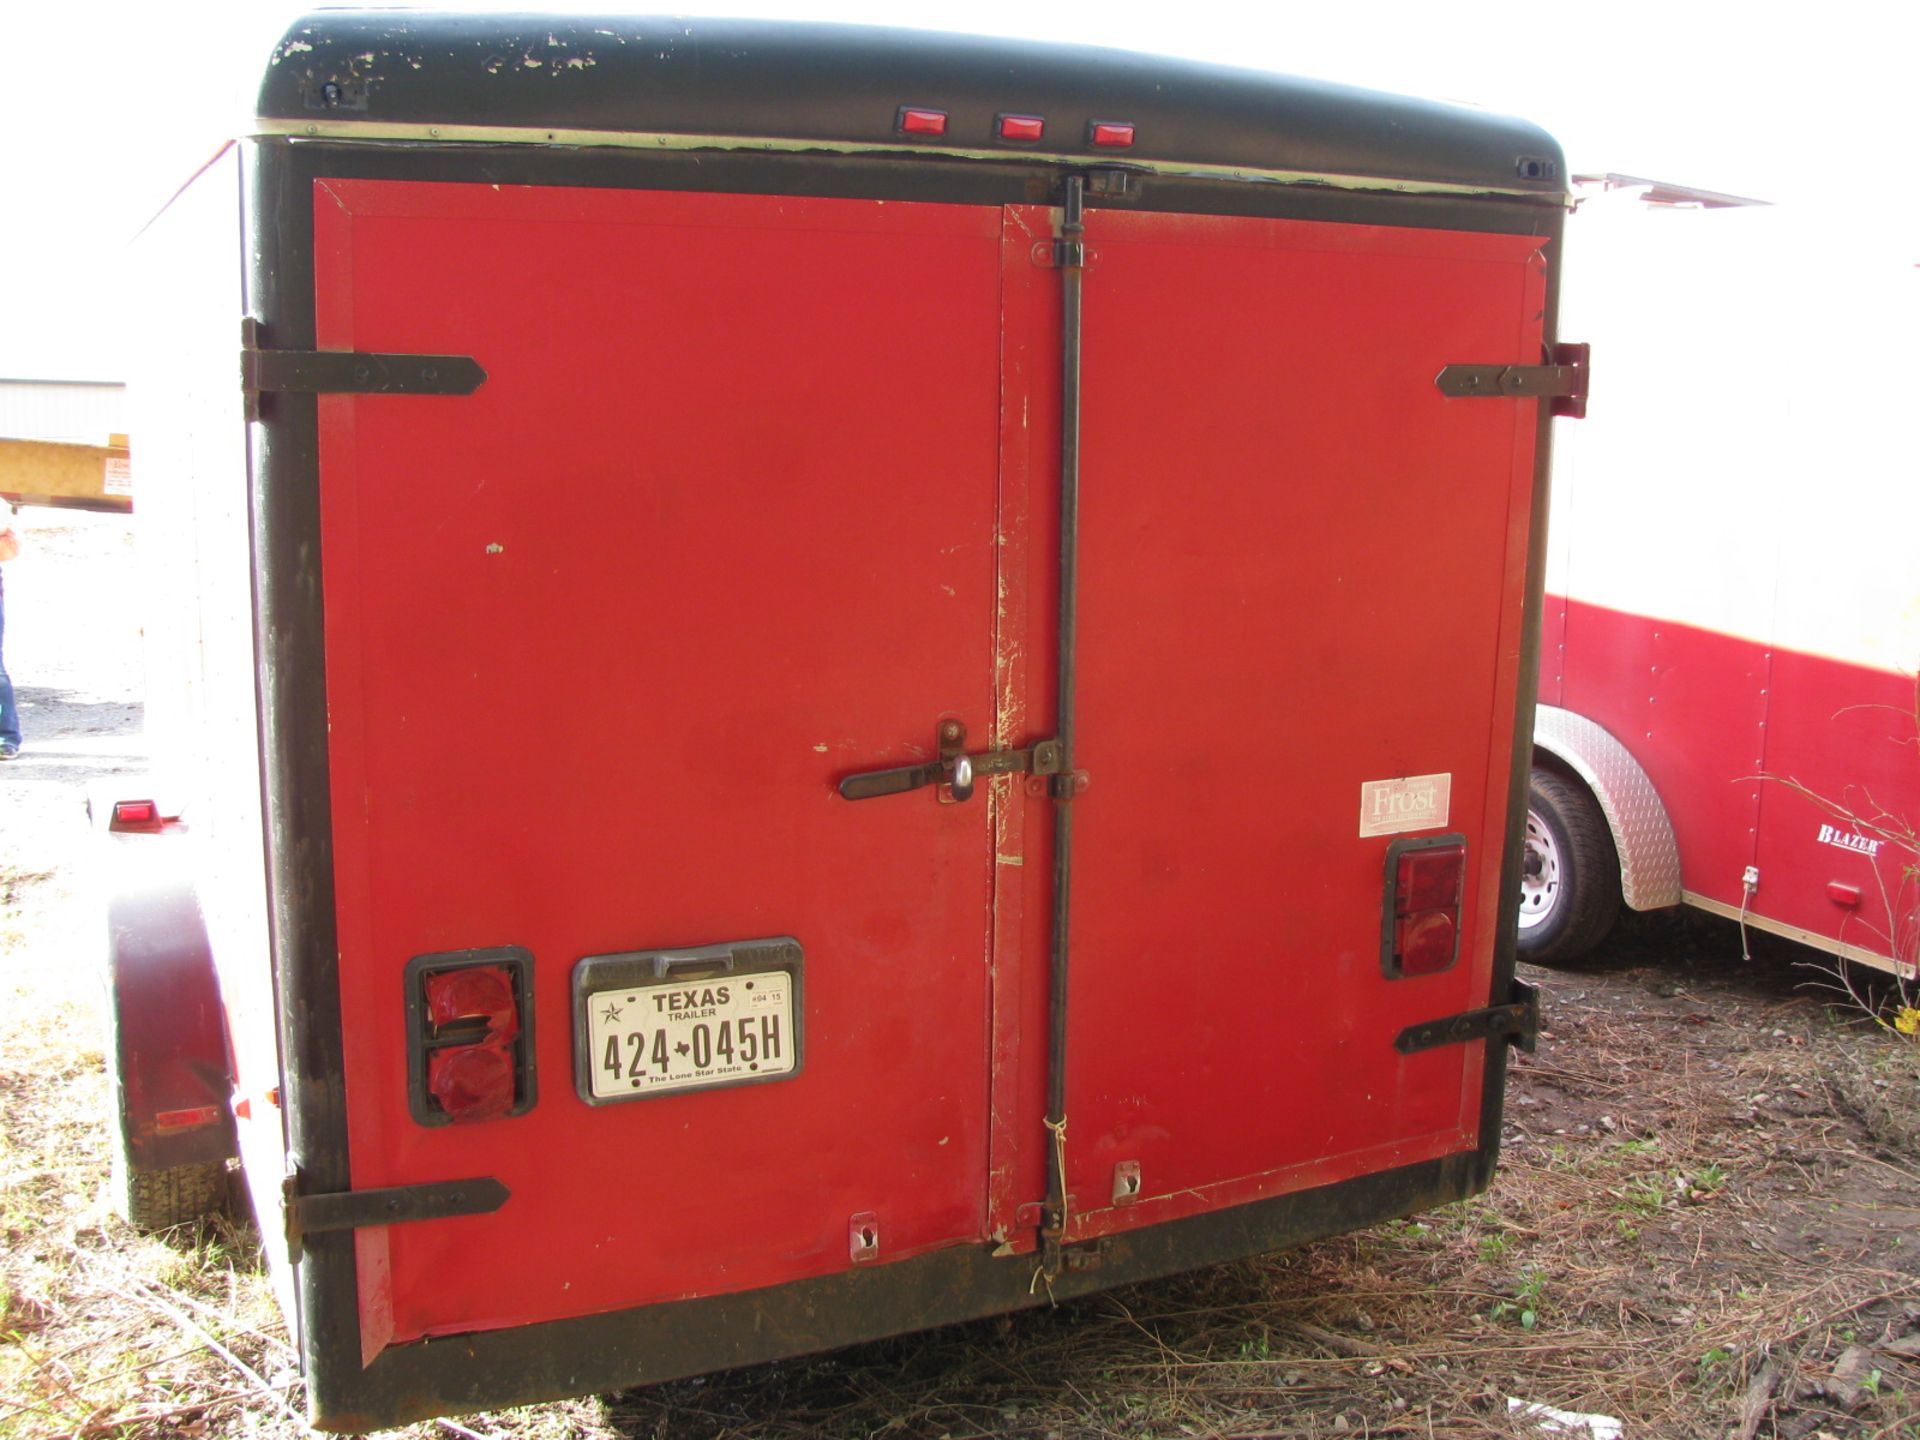 Wells Cargo 16' Enclosed Trailer (No Title) Vin # C200G21X202724 - Image 4 of 5